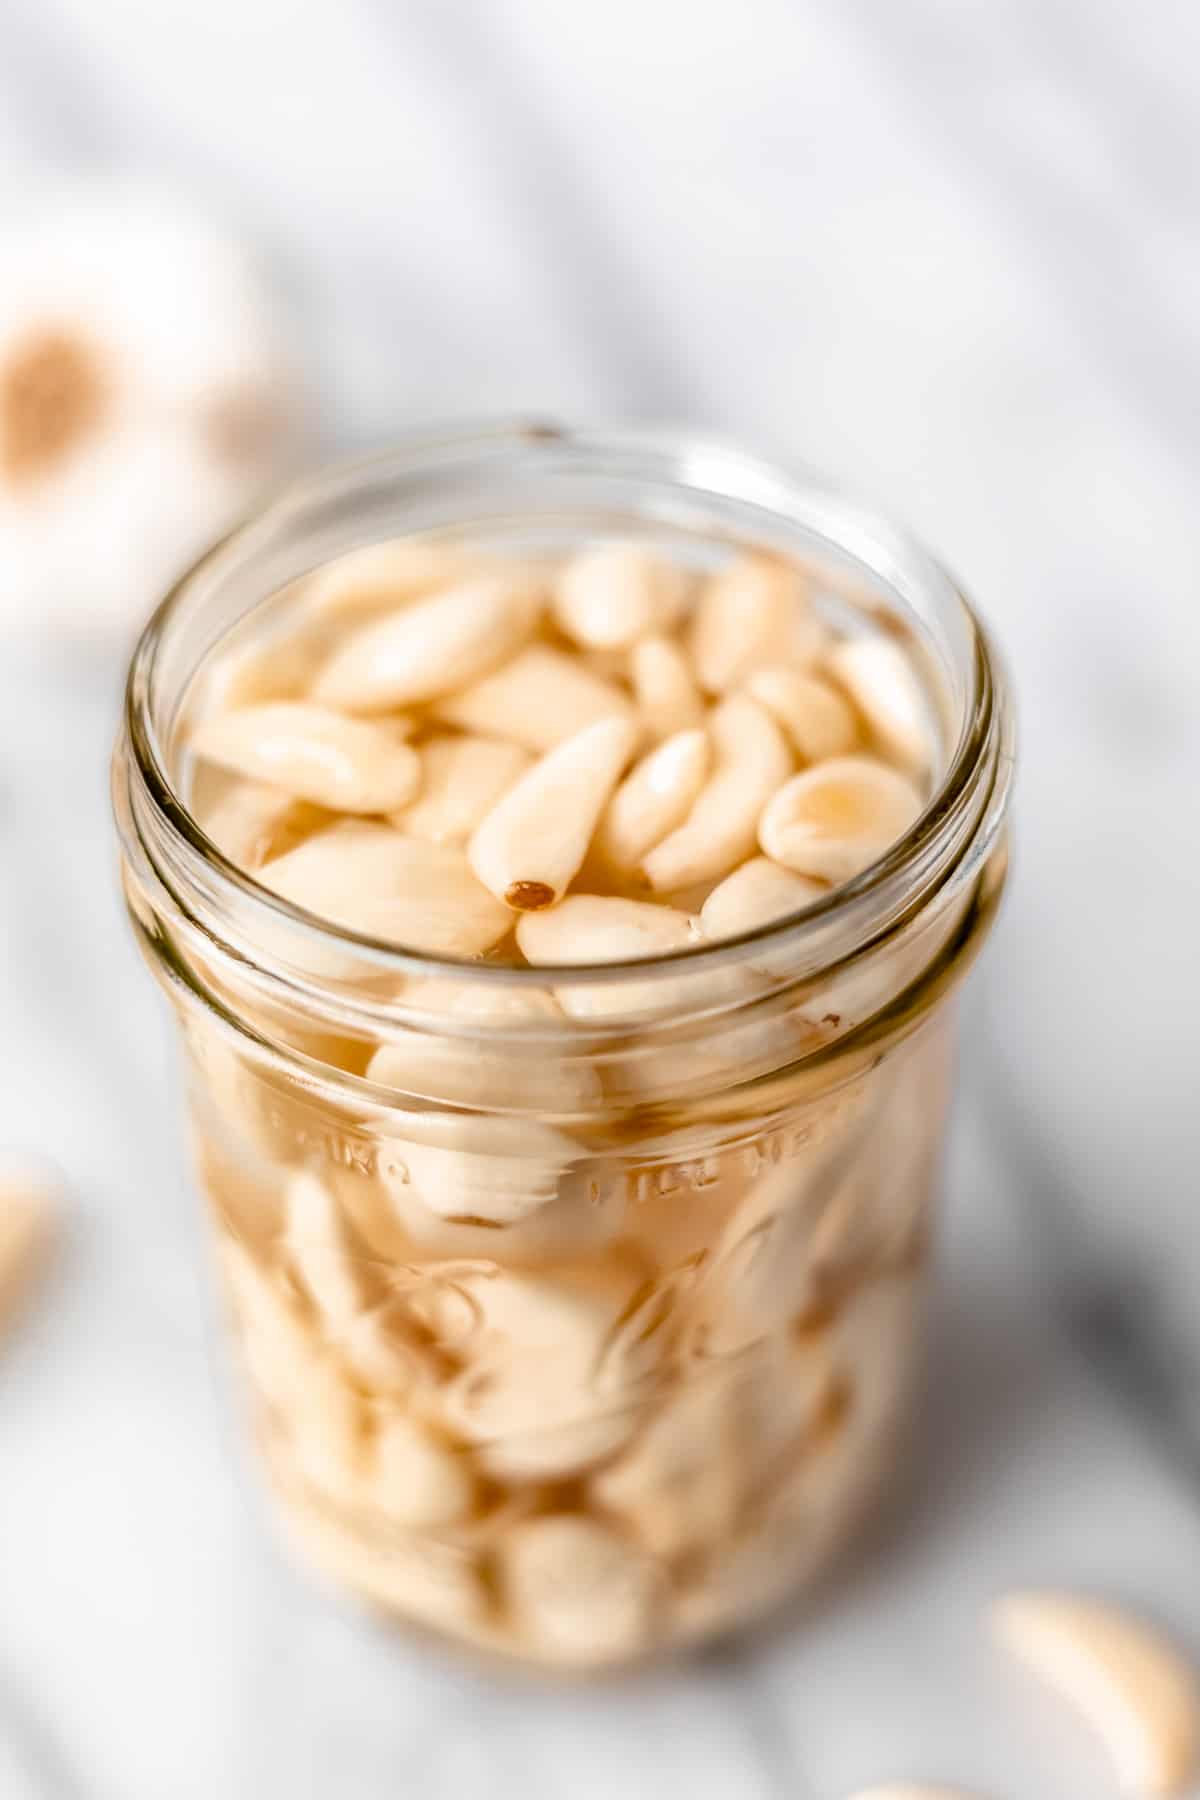 A jar full of pickled garlic with more cloves and a head of garlic around it.